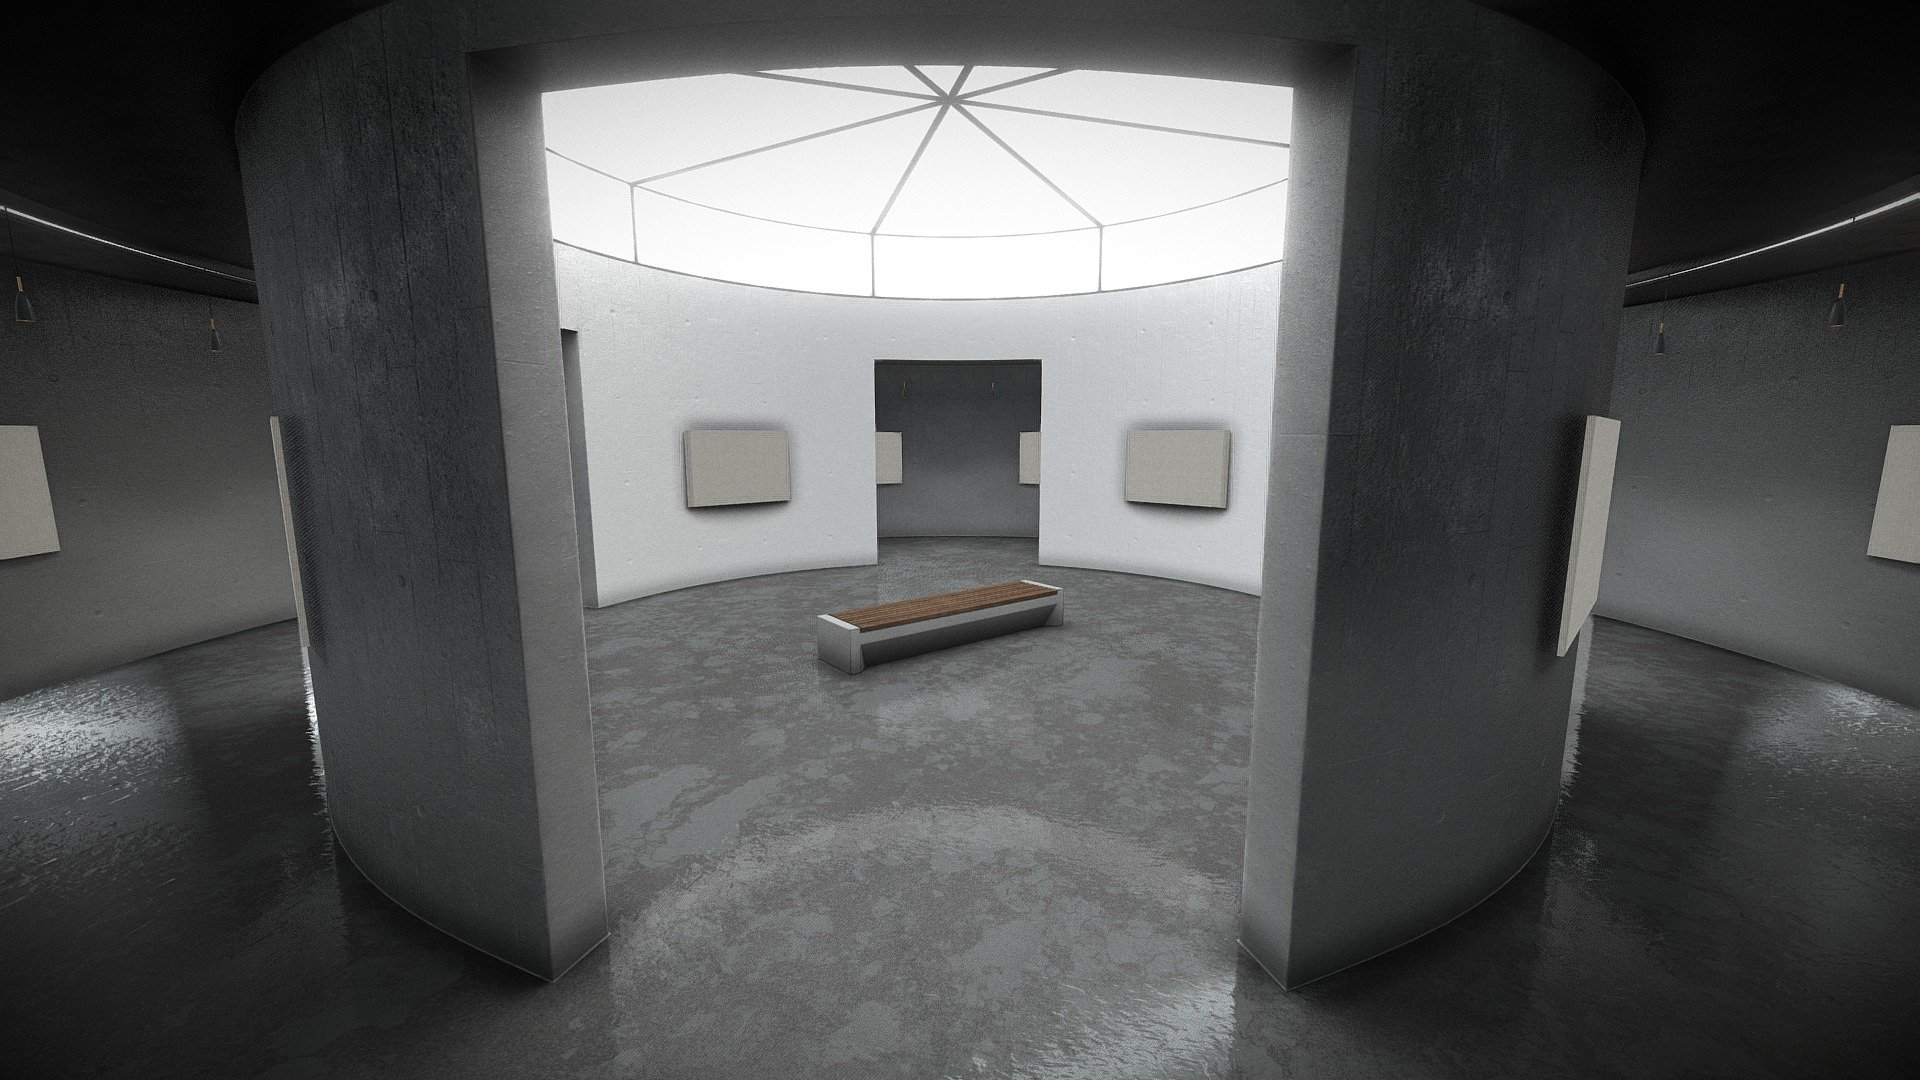 Art Gallery modeled, textured and light-baked in Blender. I also add base color texture without lightmaps in case someone need a different light setup 3d model